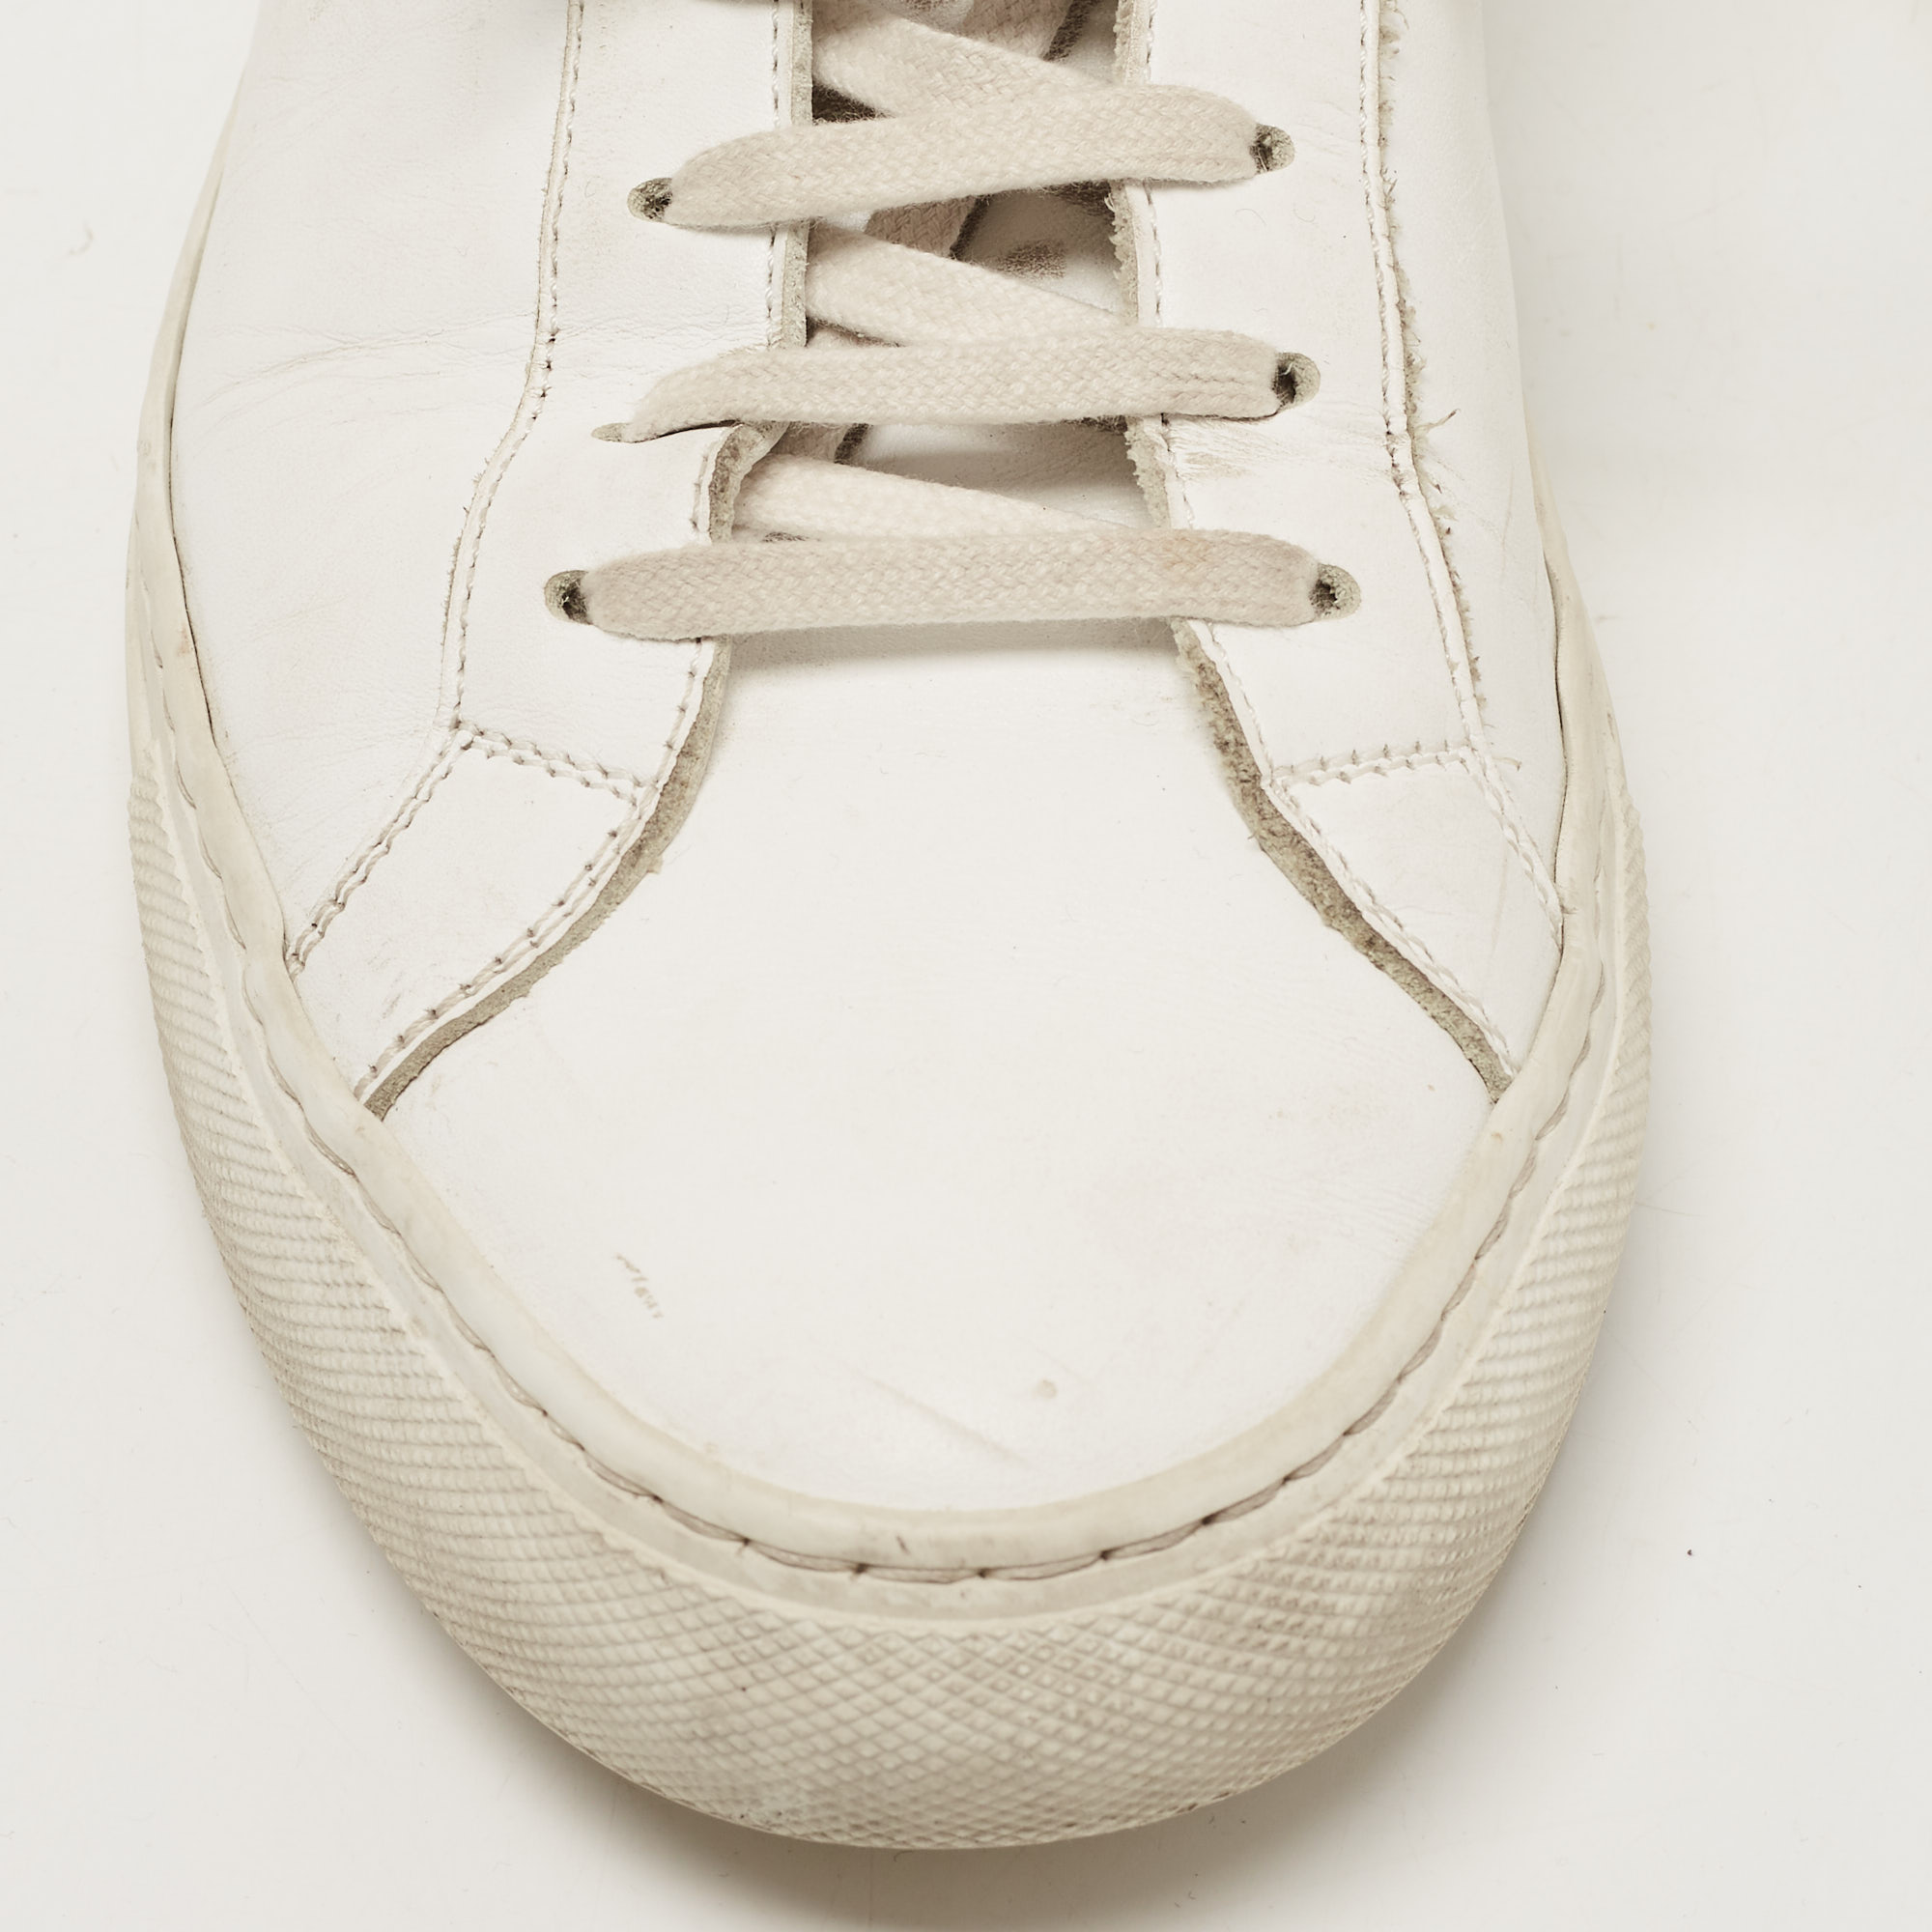 Common Projects White Leather Achilles Sneakers Size 40